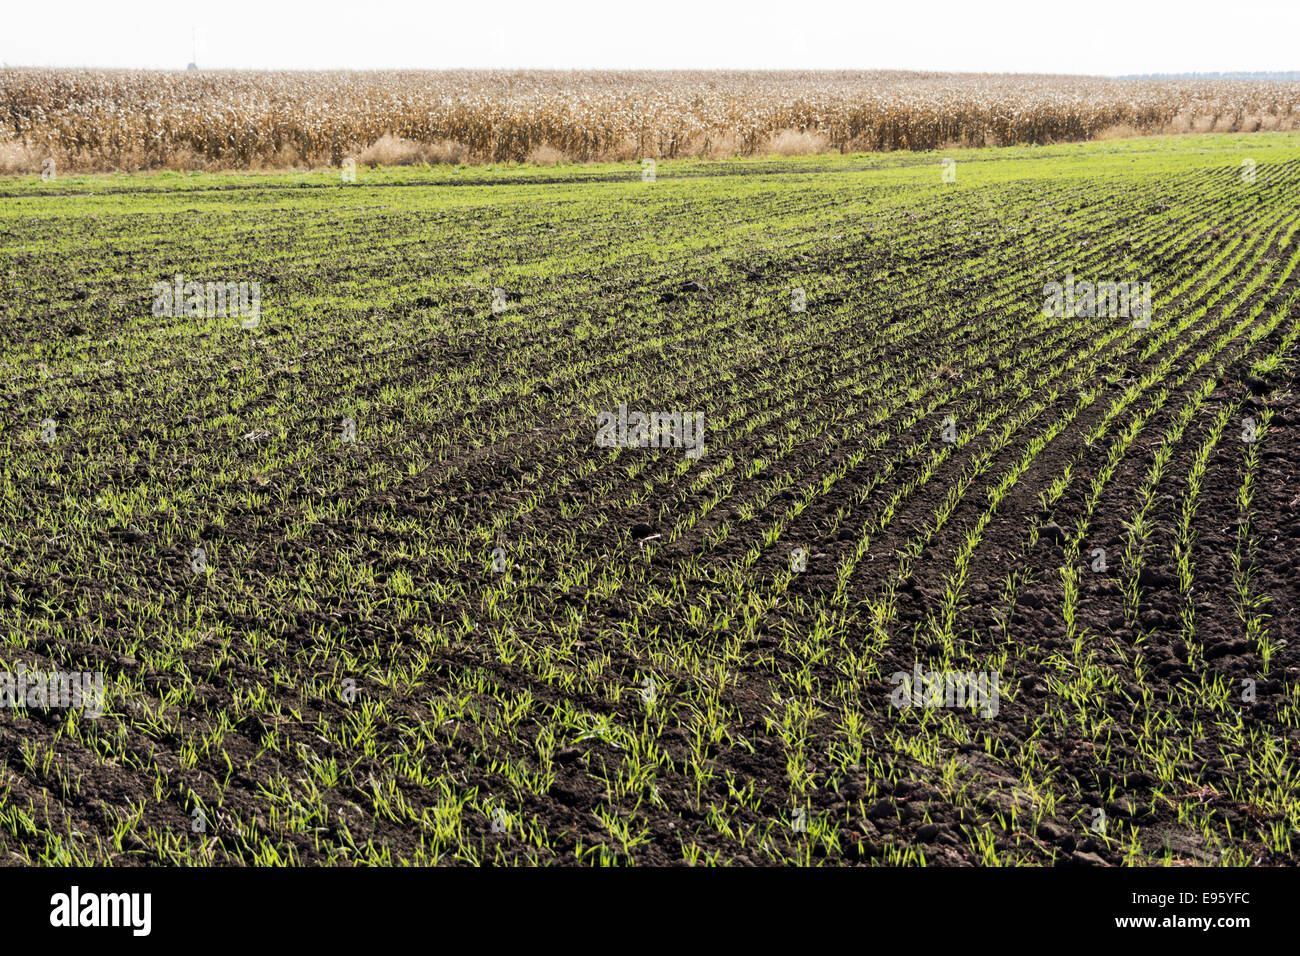 Winter wheat emerging from a field in front of a crop of field corn nearly ready to be harvested. Stock Photo